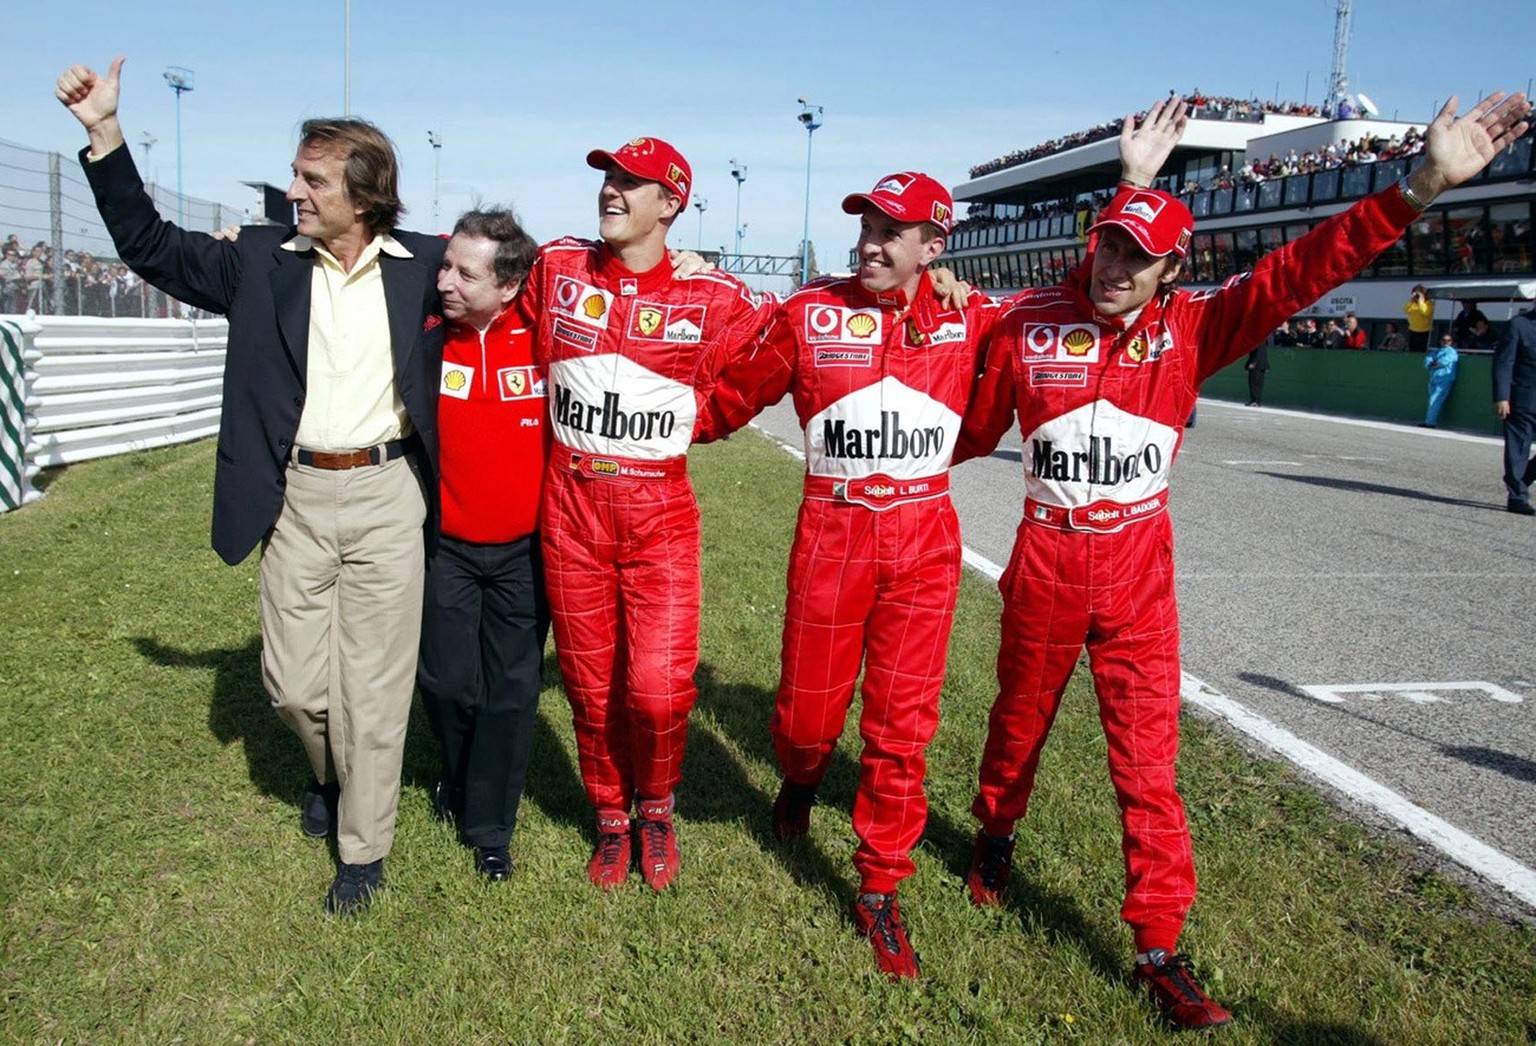 Ferrari president Luca Cordero di Montezemolo, left, team manager Jean Todt, driver Michael Schumacher of Germany, test drivers Luciano Burti and Luca Badoer wave to fans during the Ferrari day at the ...